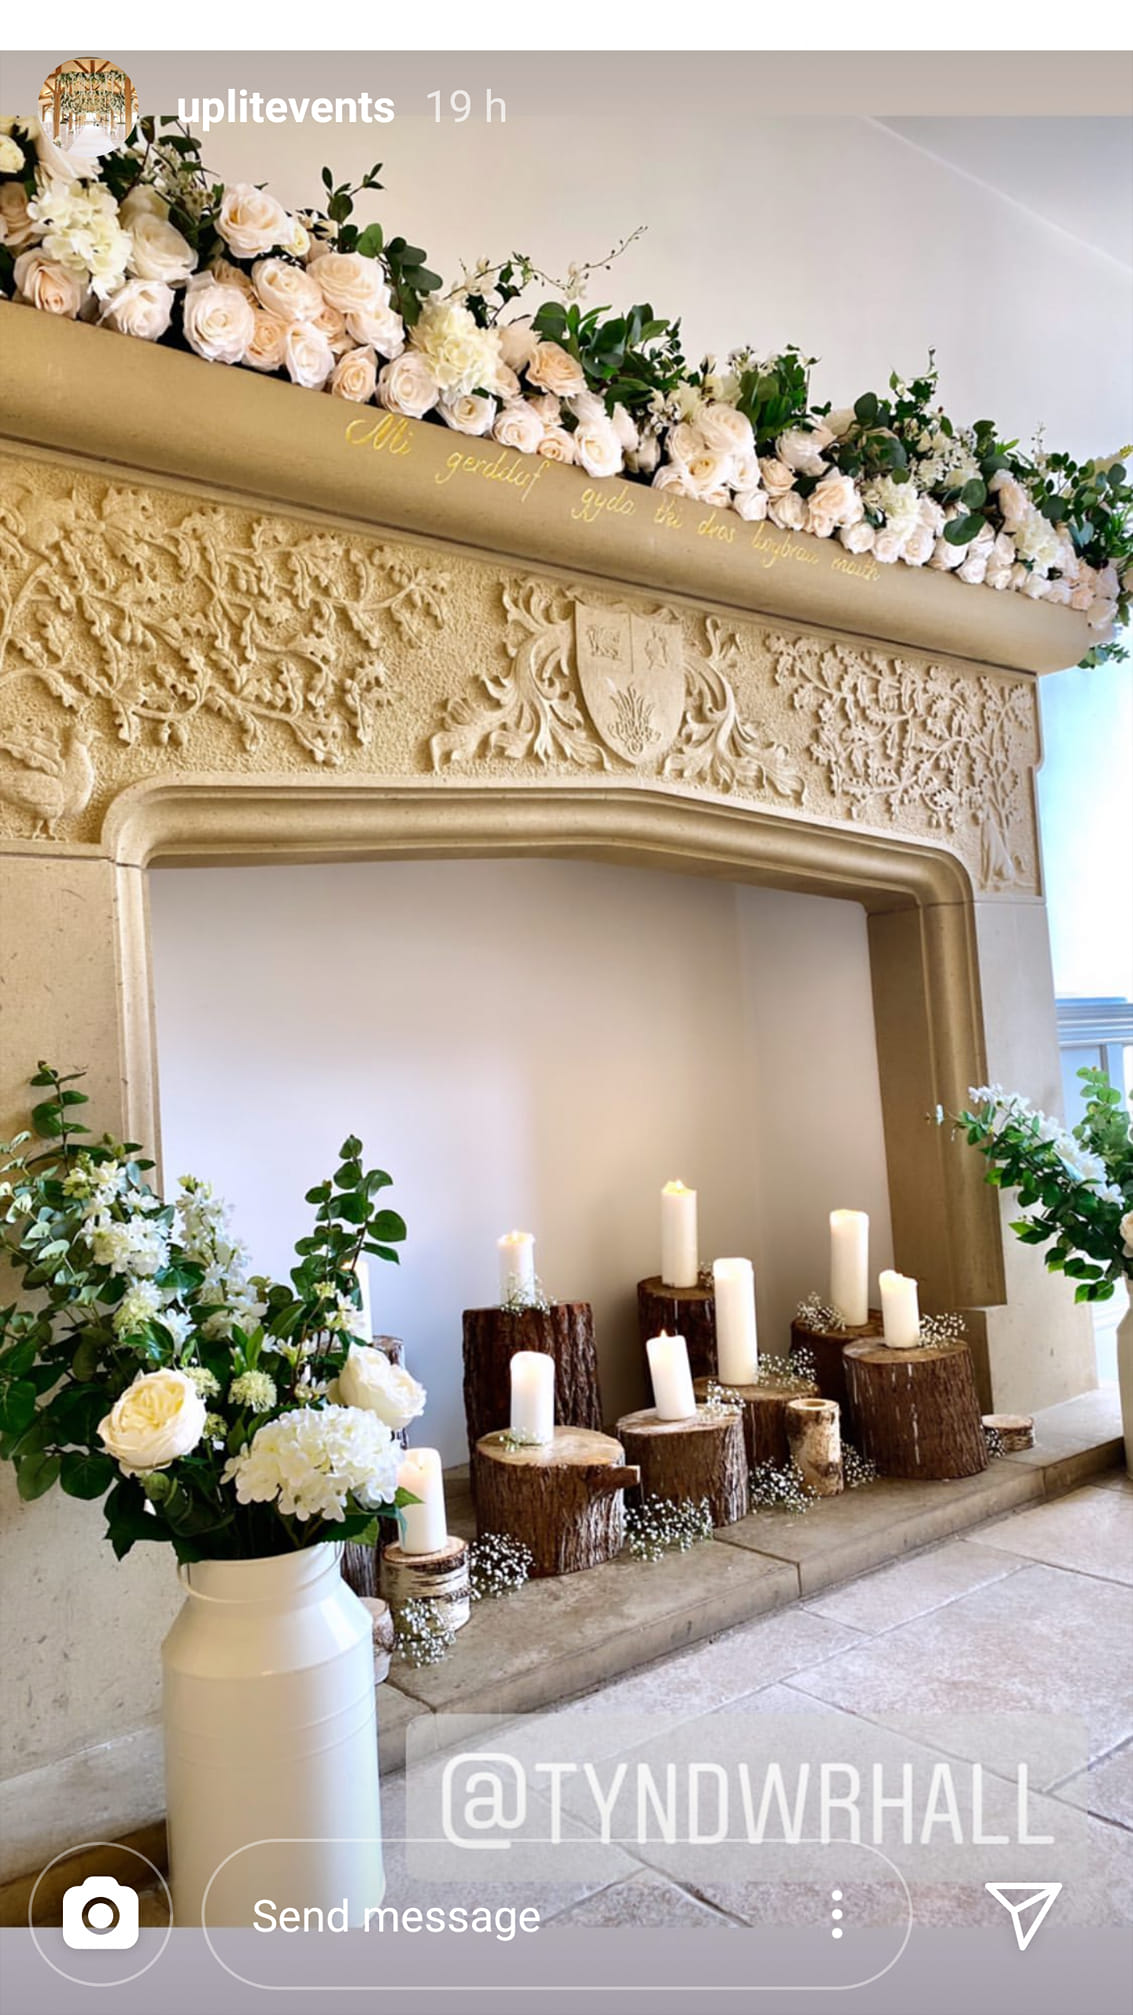 Another amazing photo of a firesurround we helped supply to a wedding venue in northwales. North Wales, North West, Wirral, Liverpool & Cheshire UK